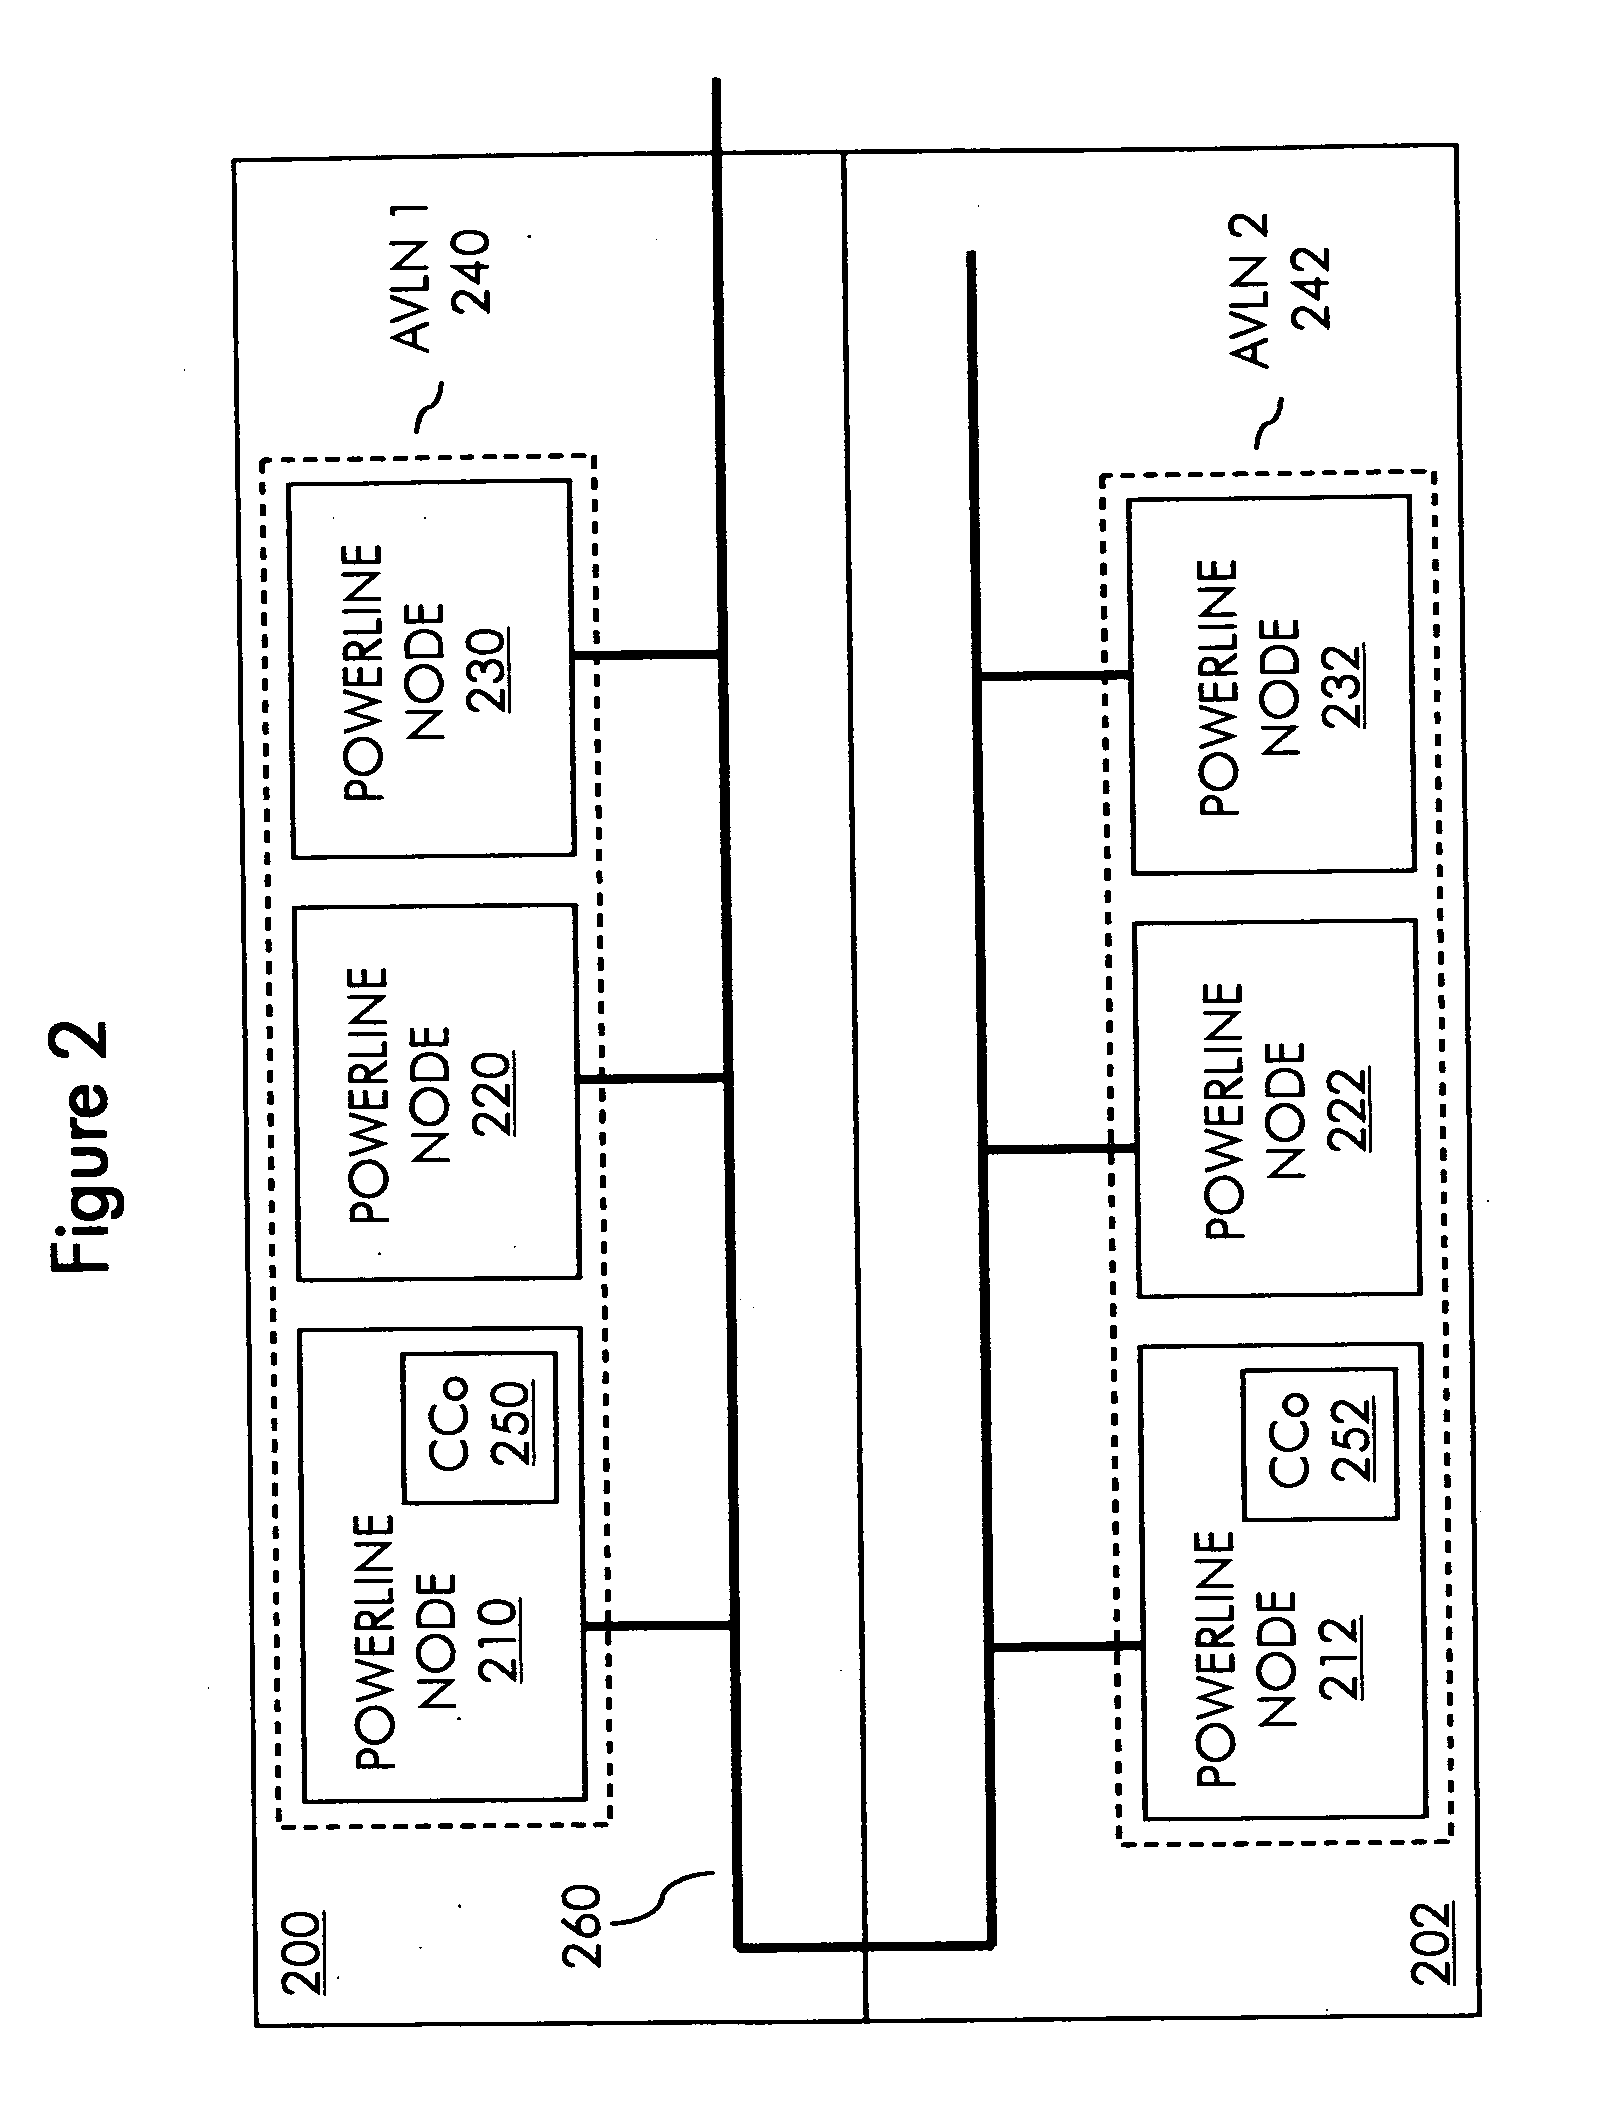 Method and system for conserving power in powerline network having multiple logical networks